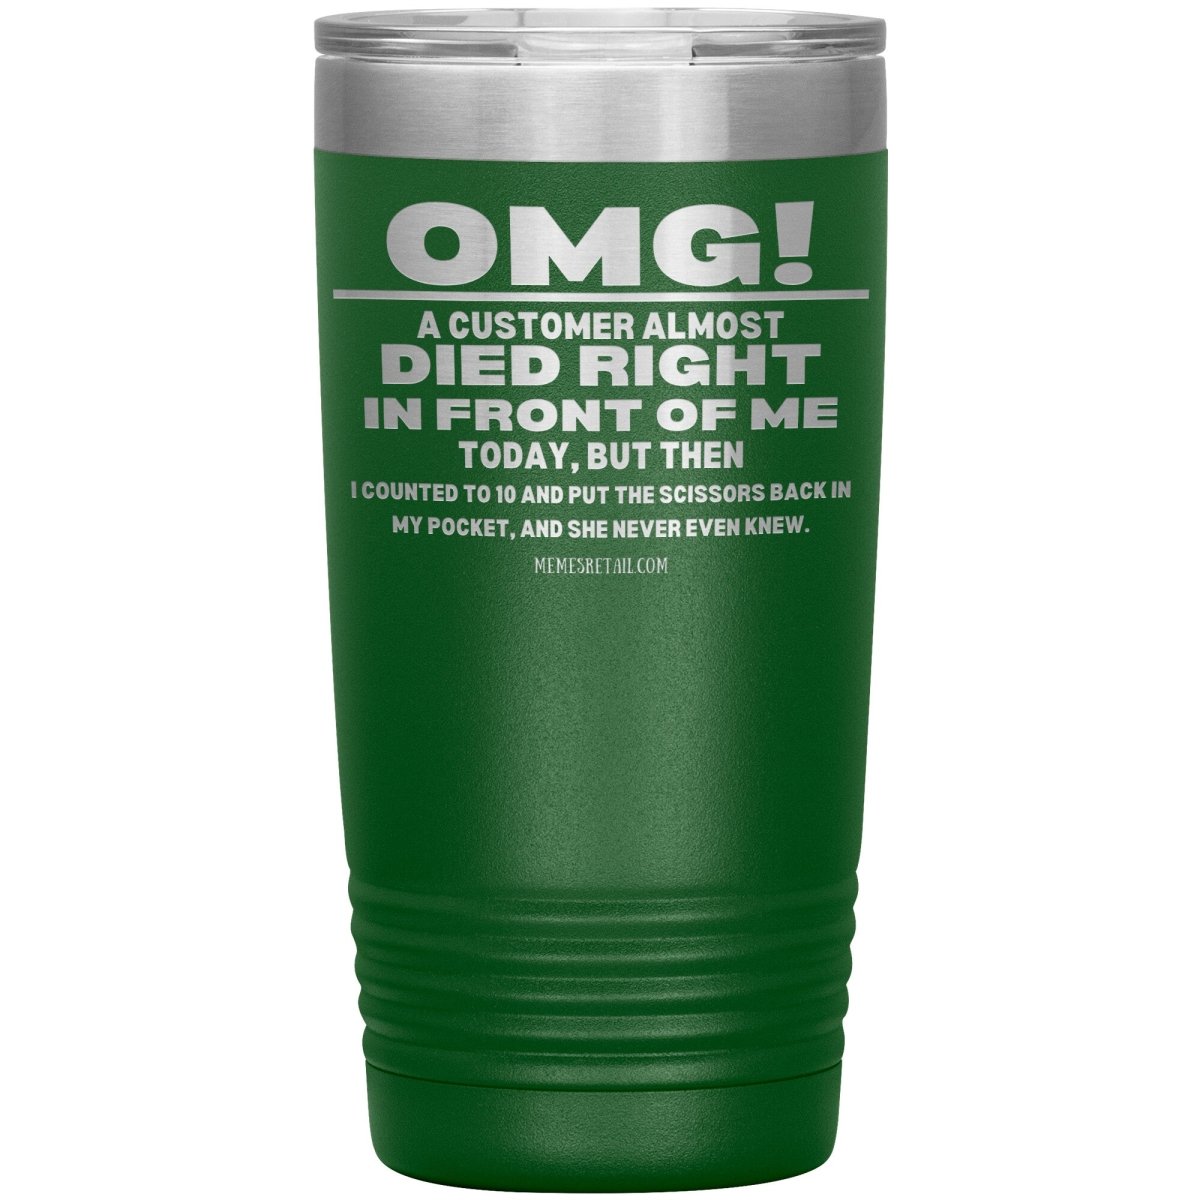 OMG! A Customer Almost Died Right In Front Of Me Tumbler, 20oz Insulated Tumbler / Green - MemesRetail.com